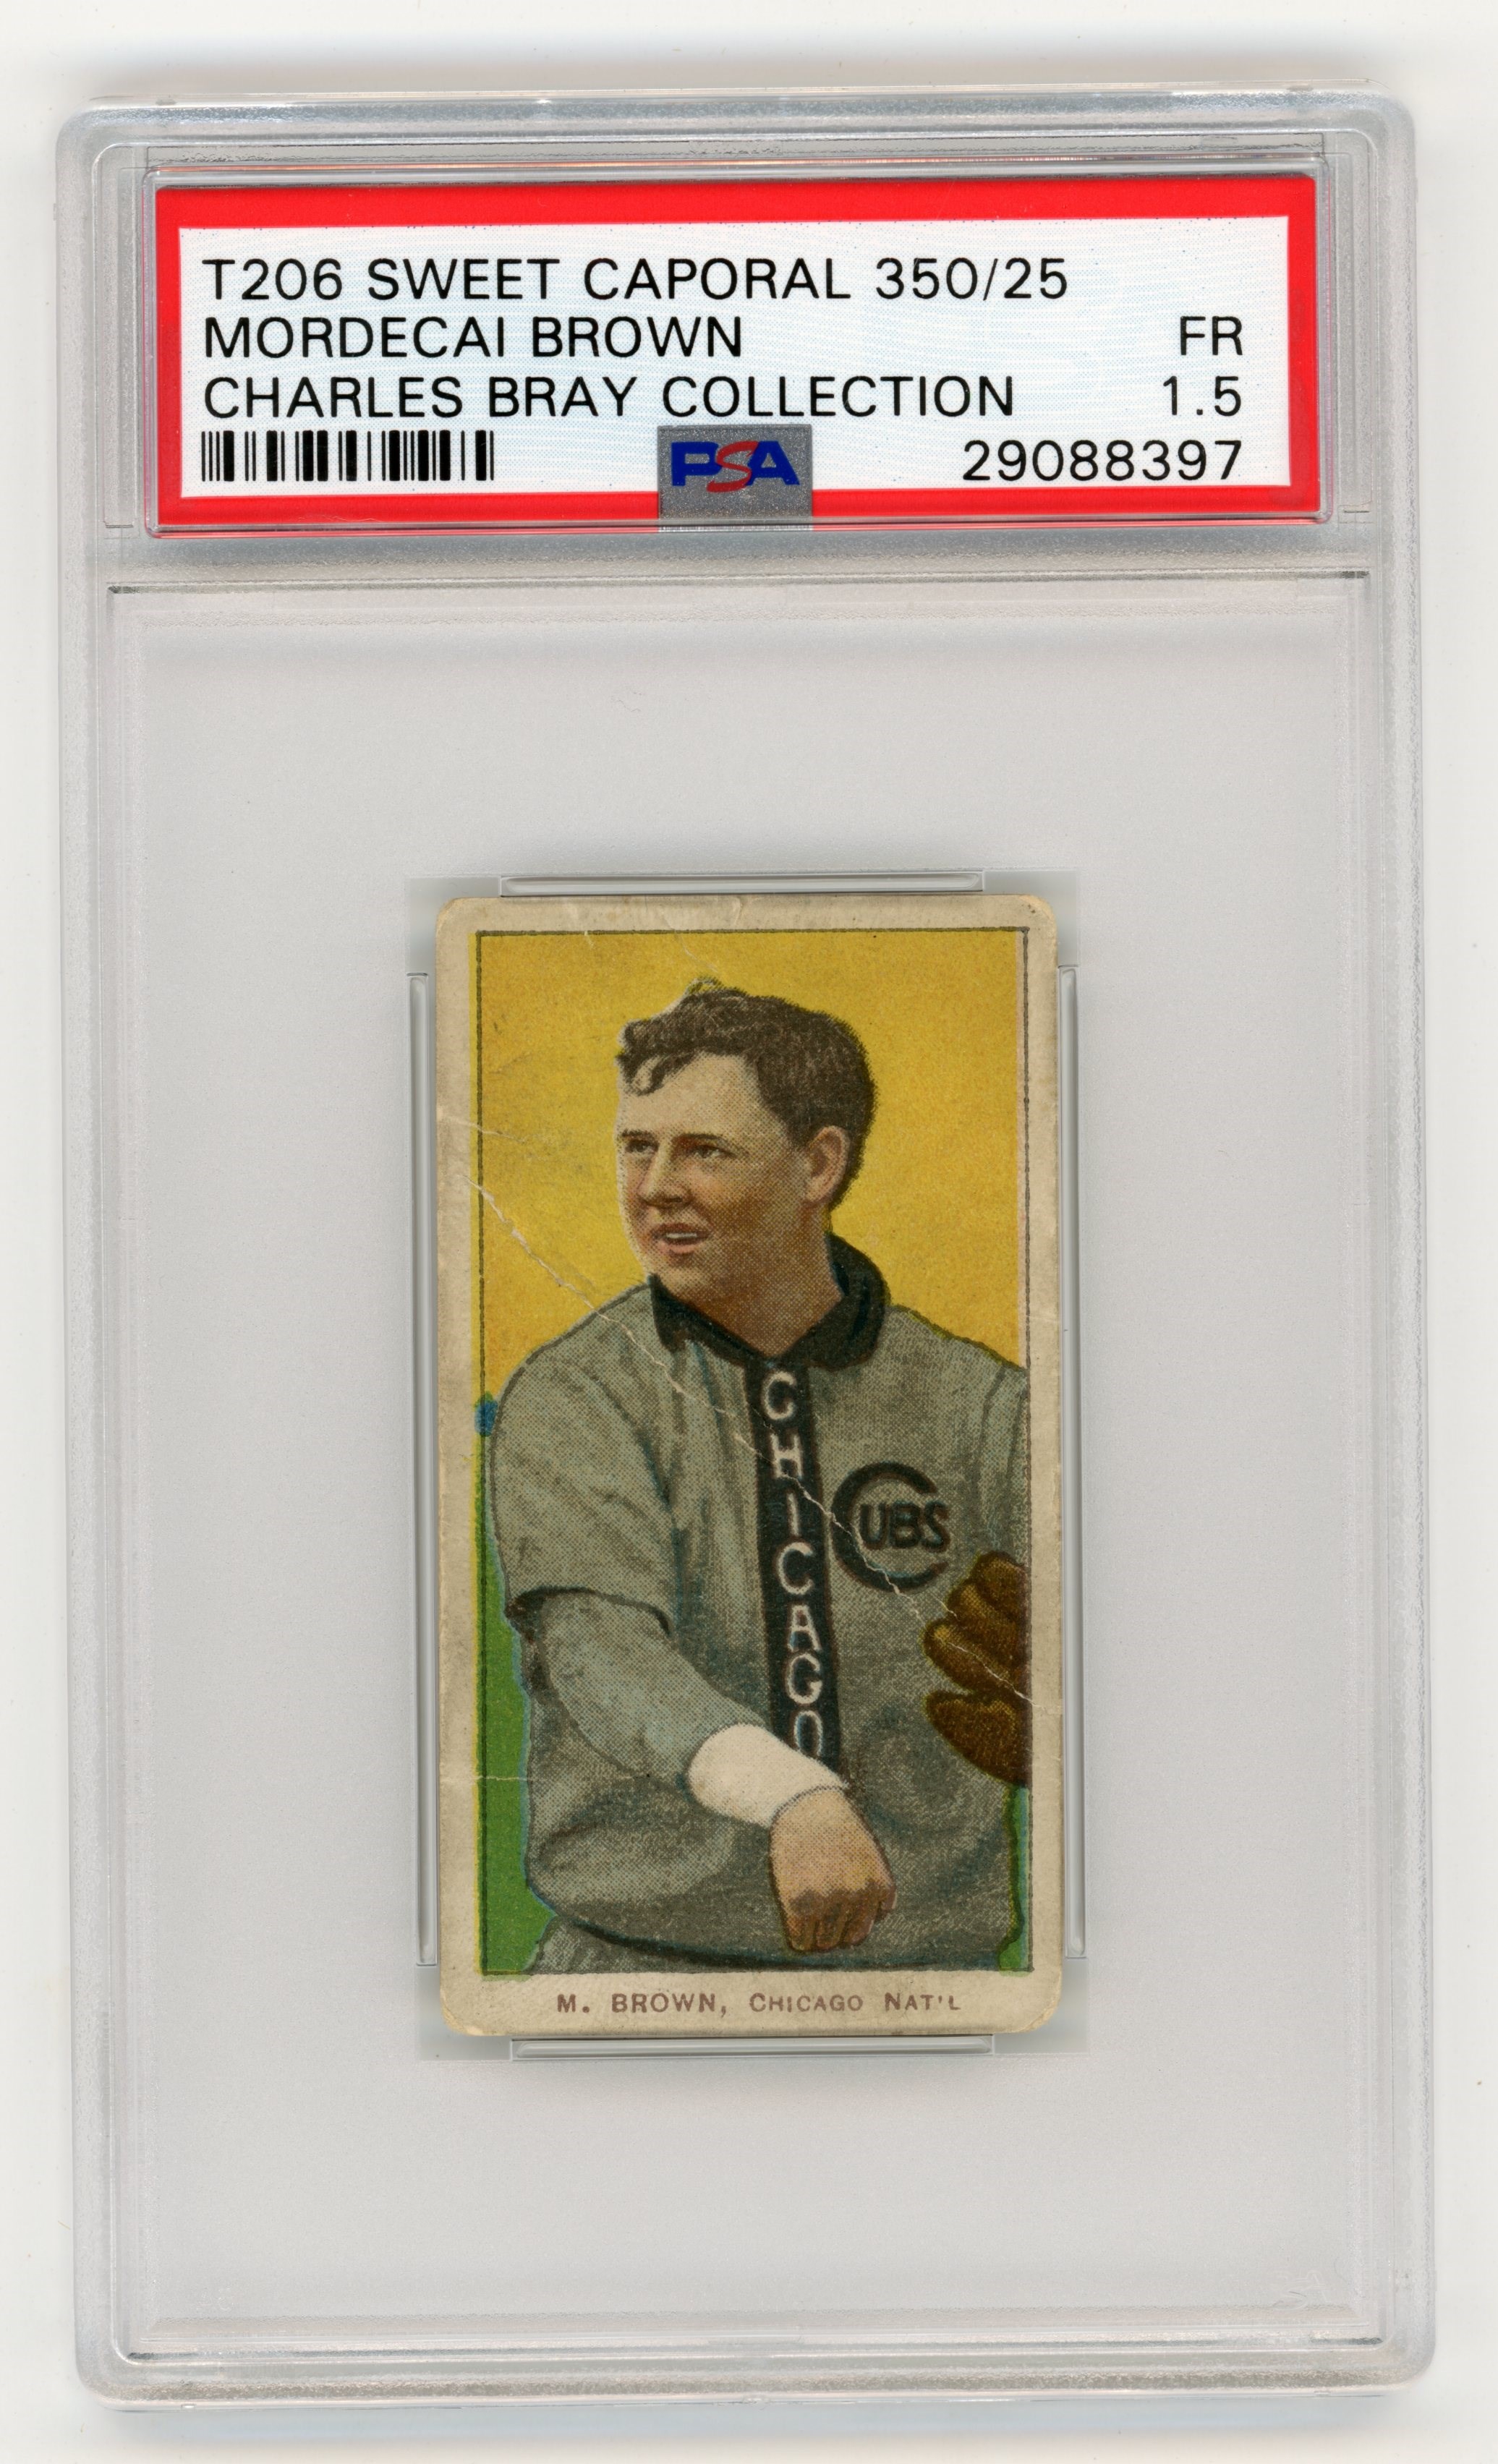 T206 Sweet Caporal 350/25 Mordecai Brown PSA 1.5 From The Charles Bray Collection